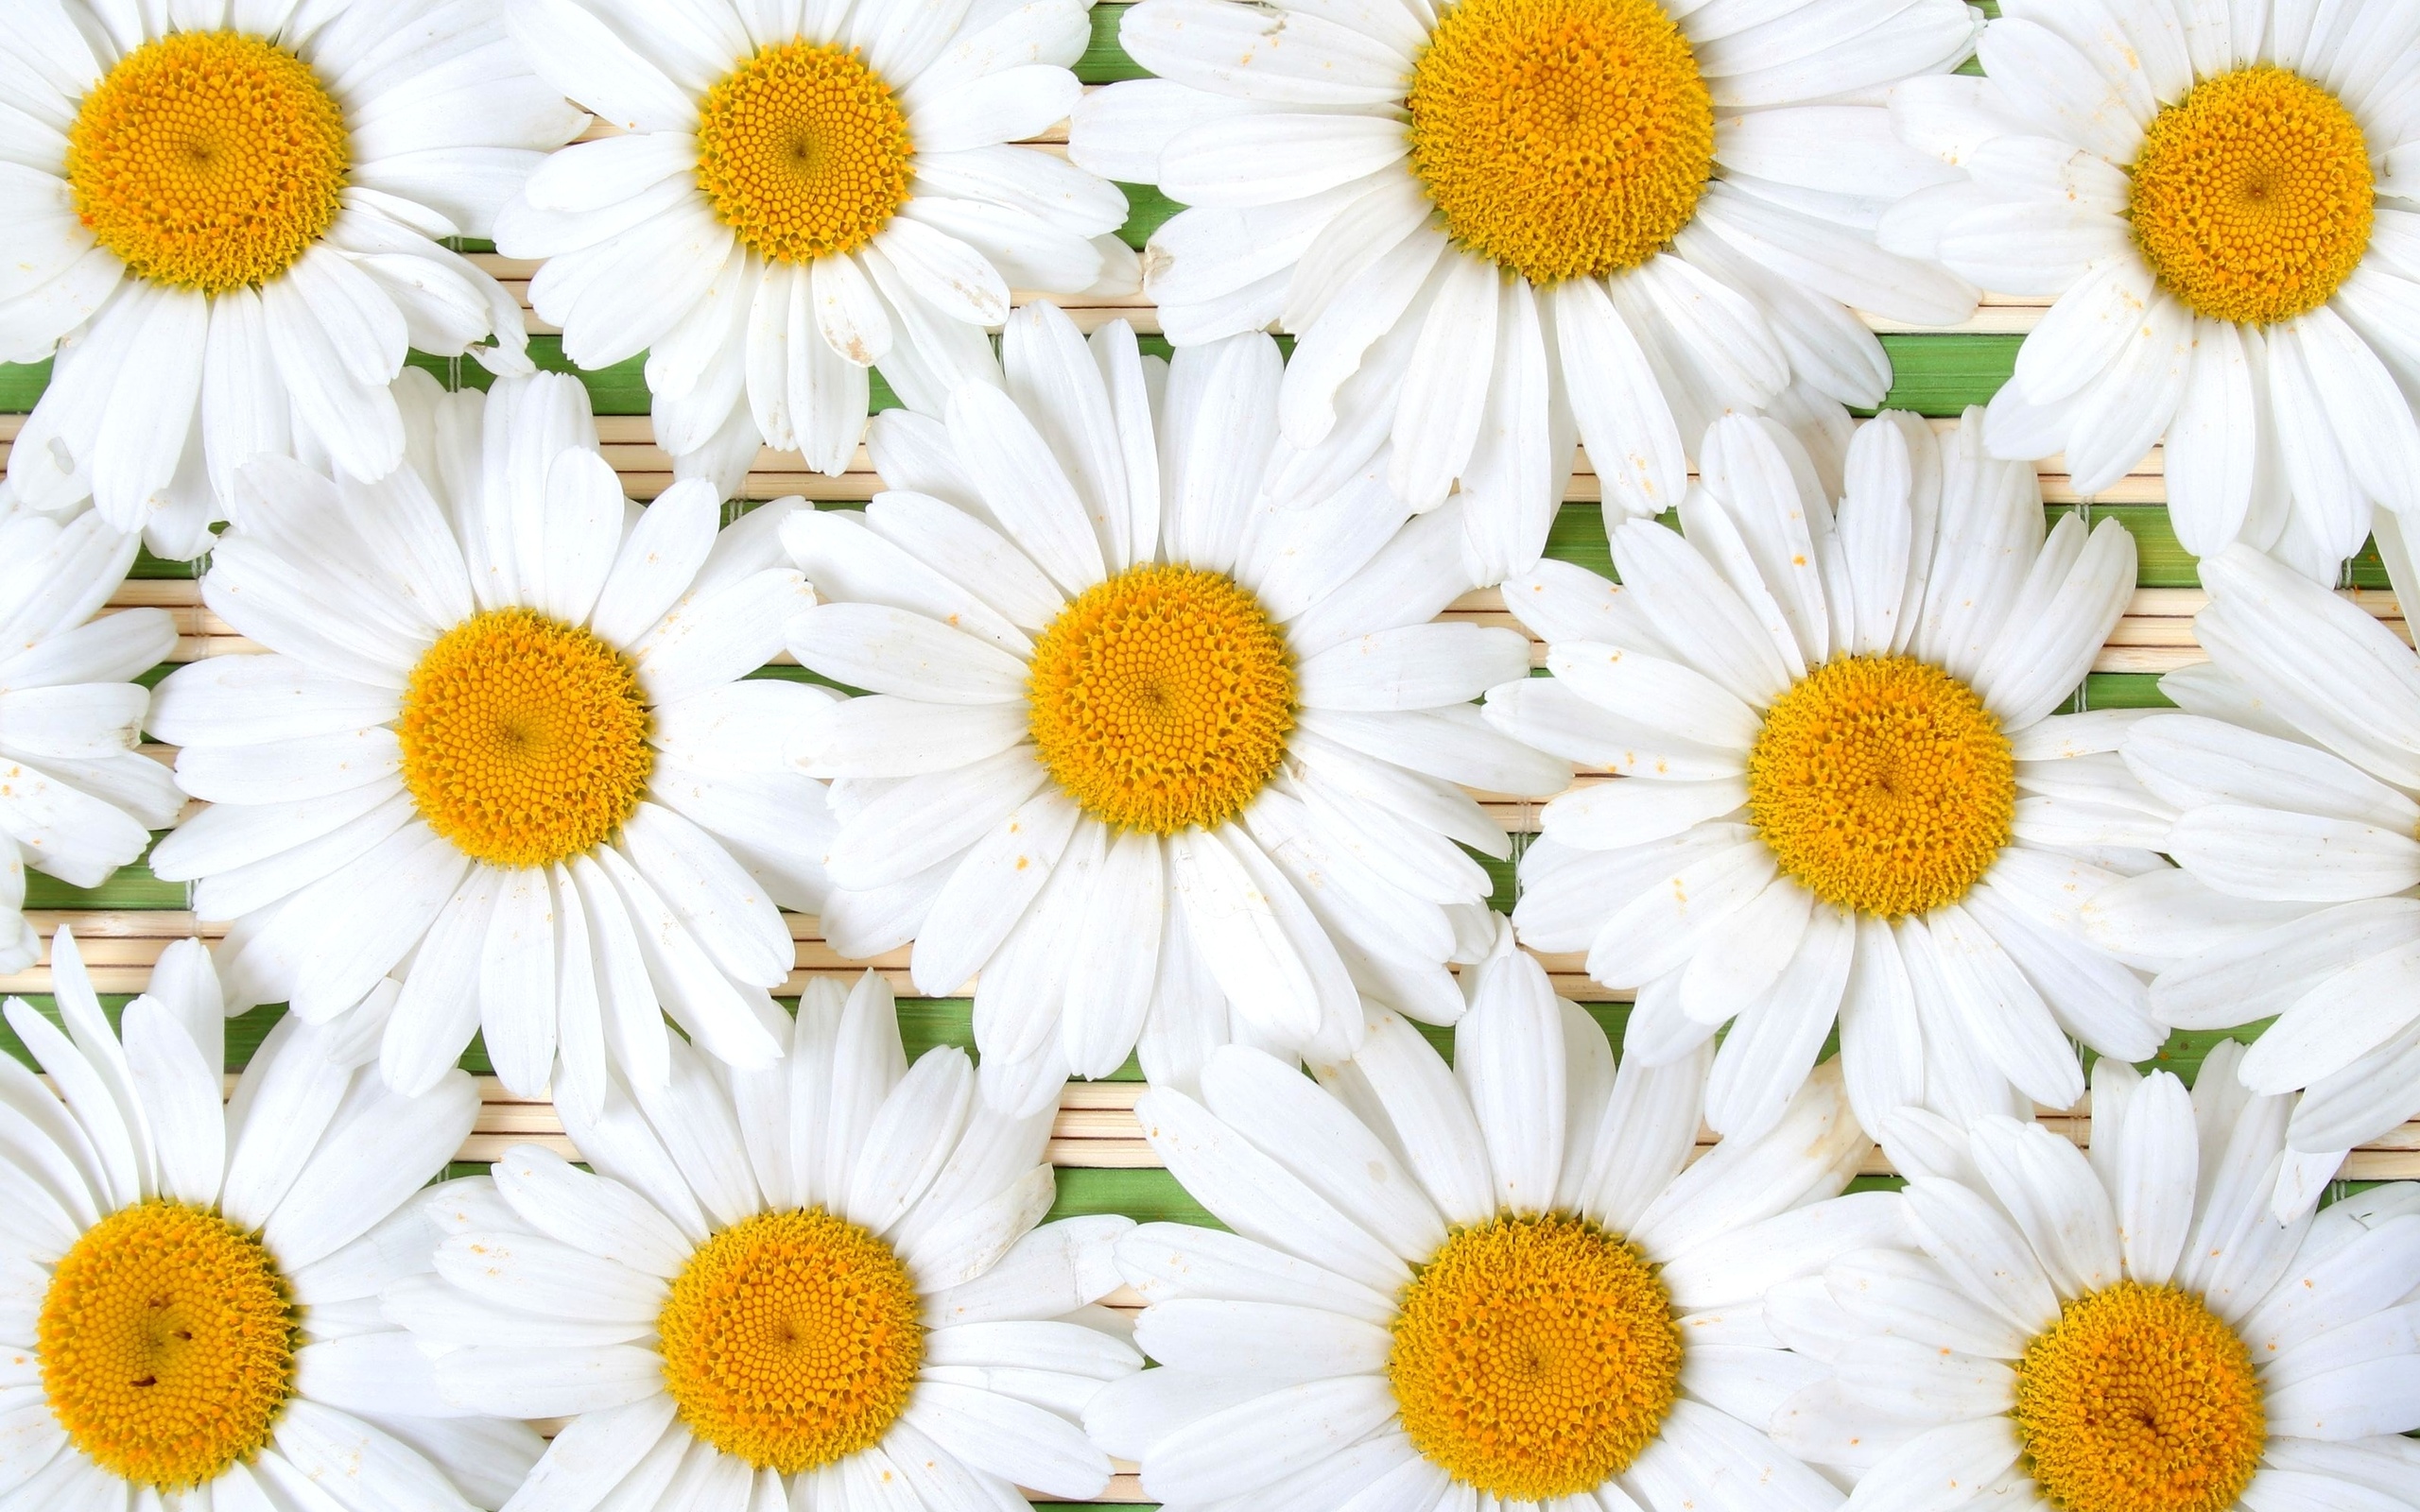 Free Download Daisy Flower Hd Wallpaper For Desktop 1366x768 For Your